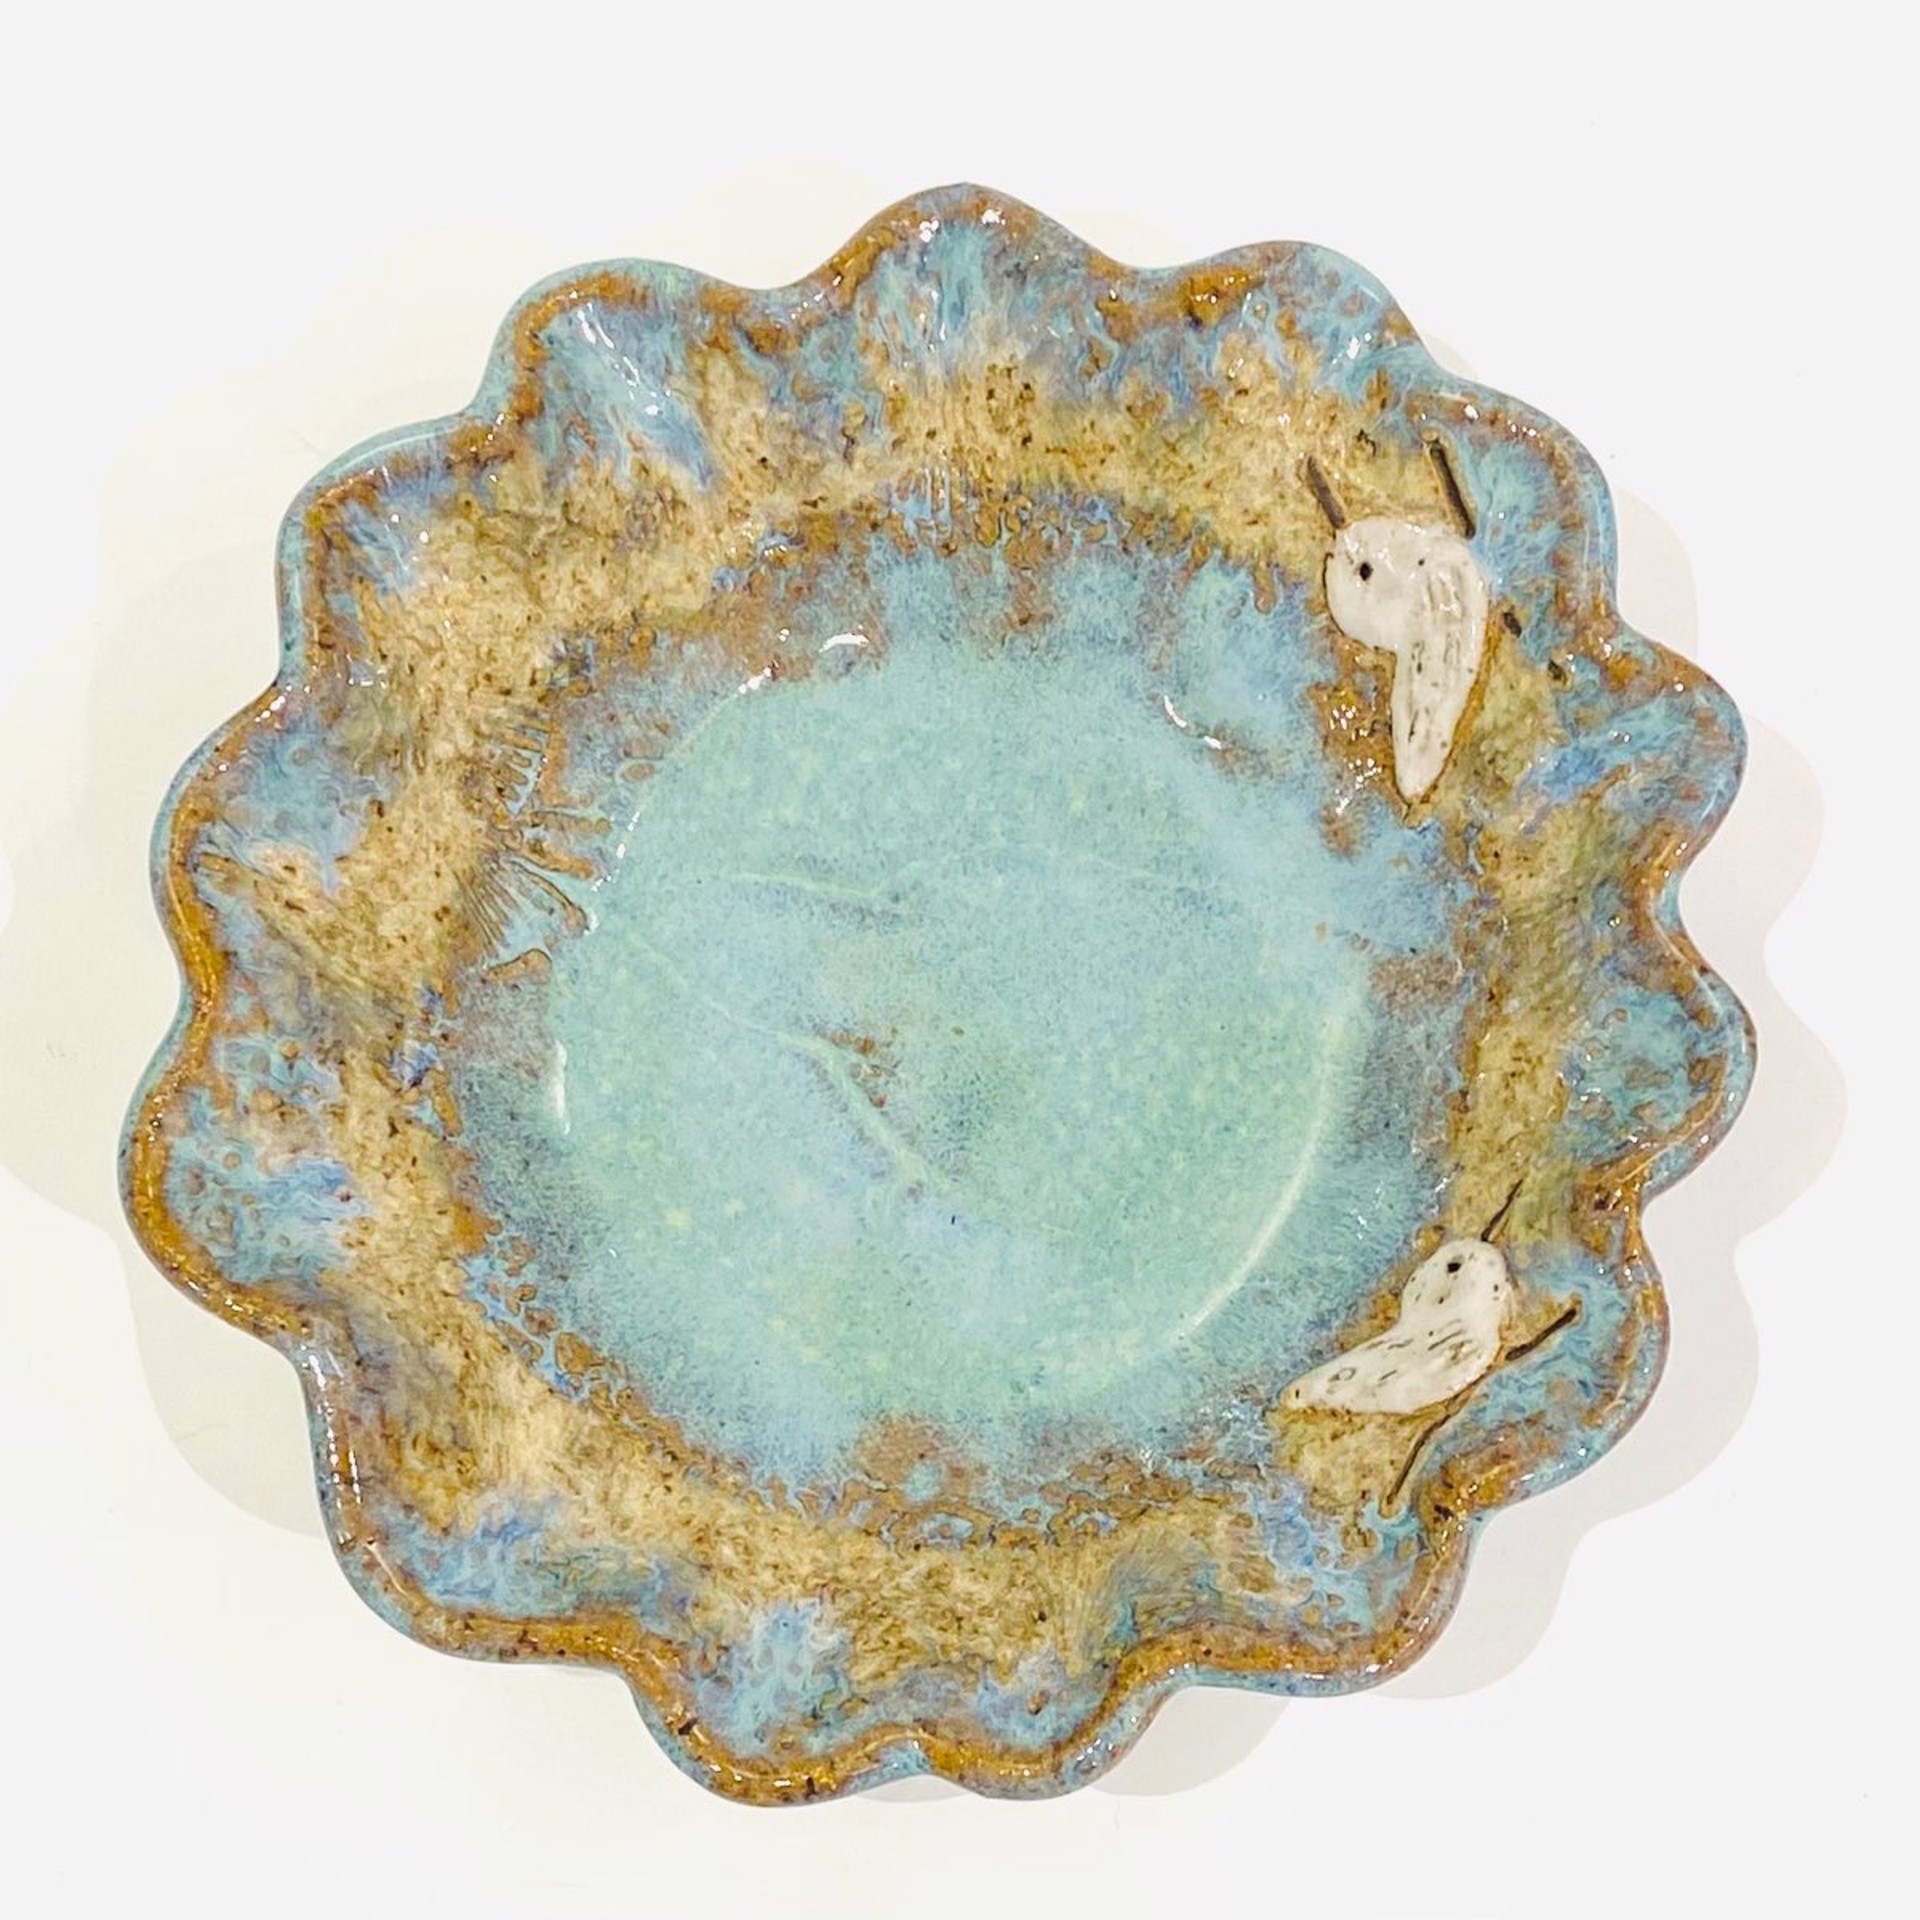 LG22-899 Small Round Scalloped Bowl with Two Sandpiper (Green Glaze) by Jim & Steffi Logan